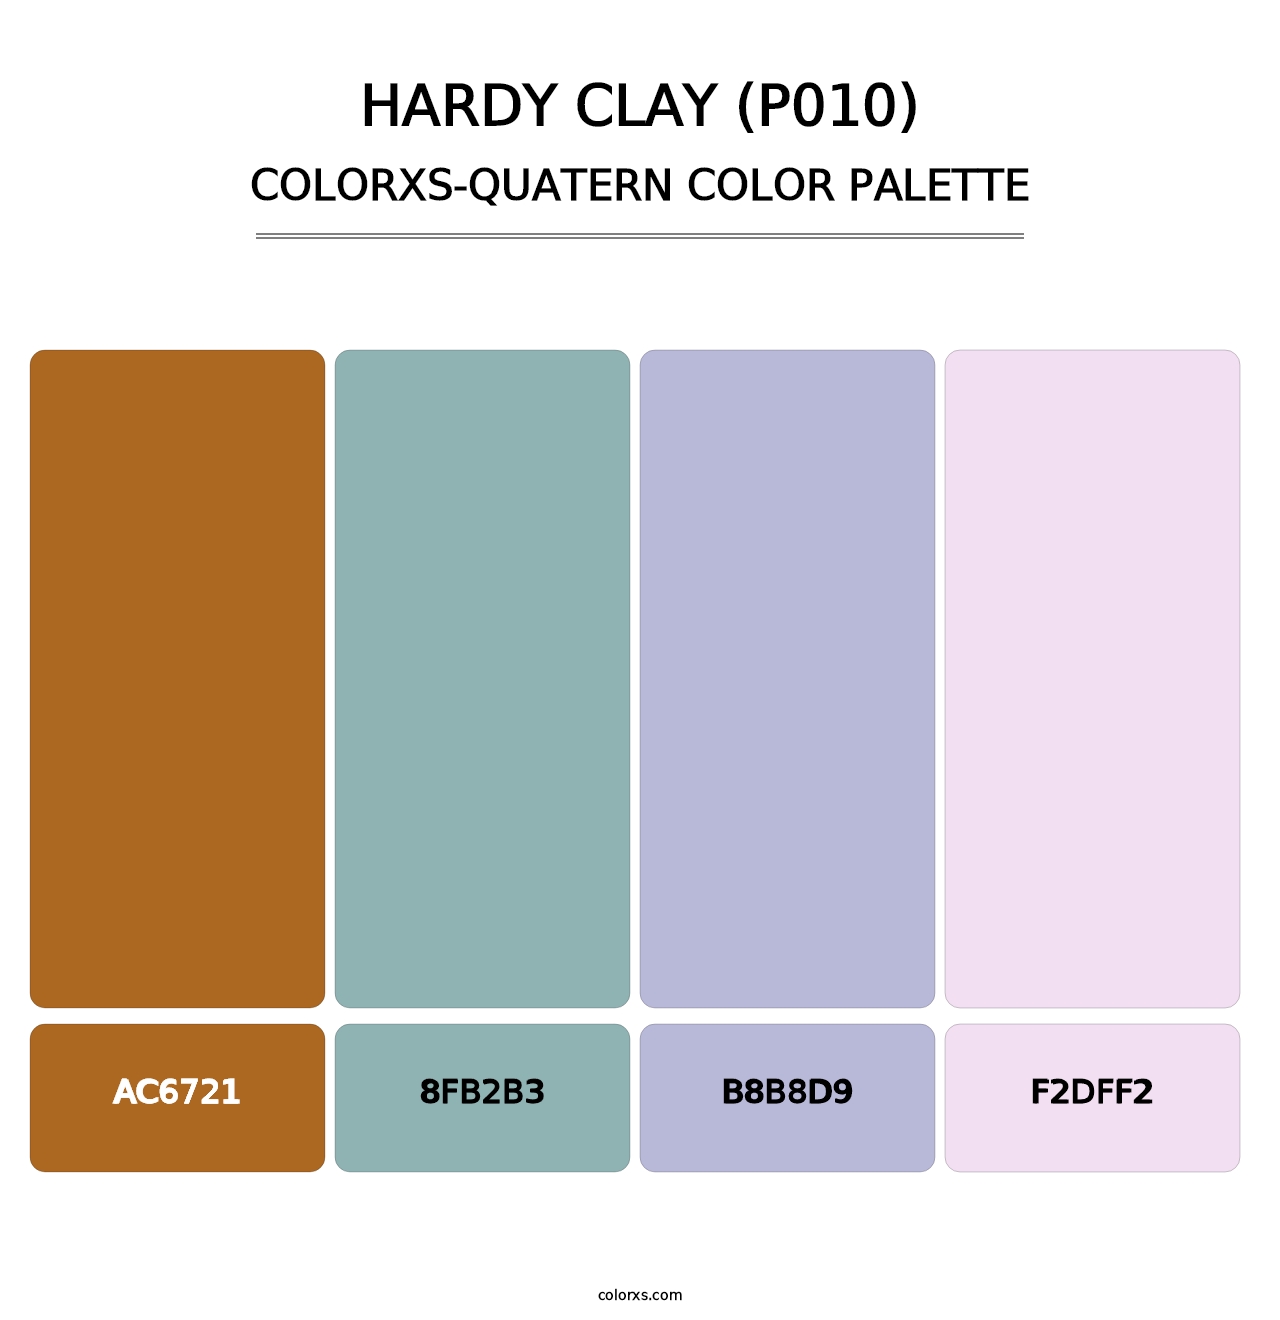 Hardy Clay (P010) - Colorxs Quatern Palette